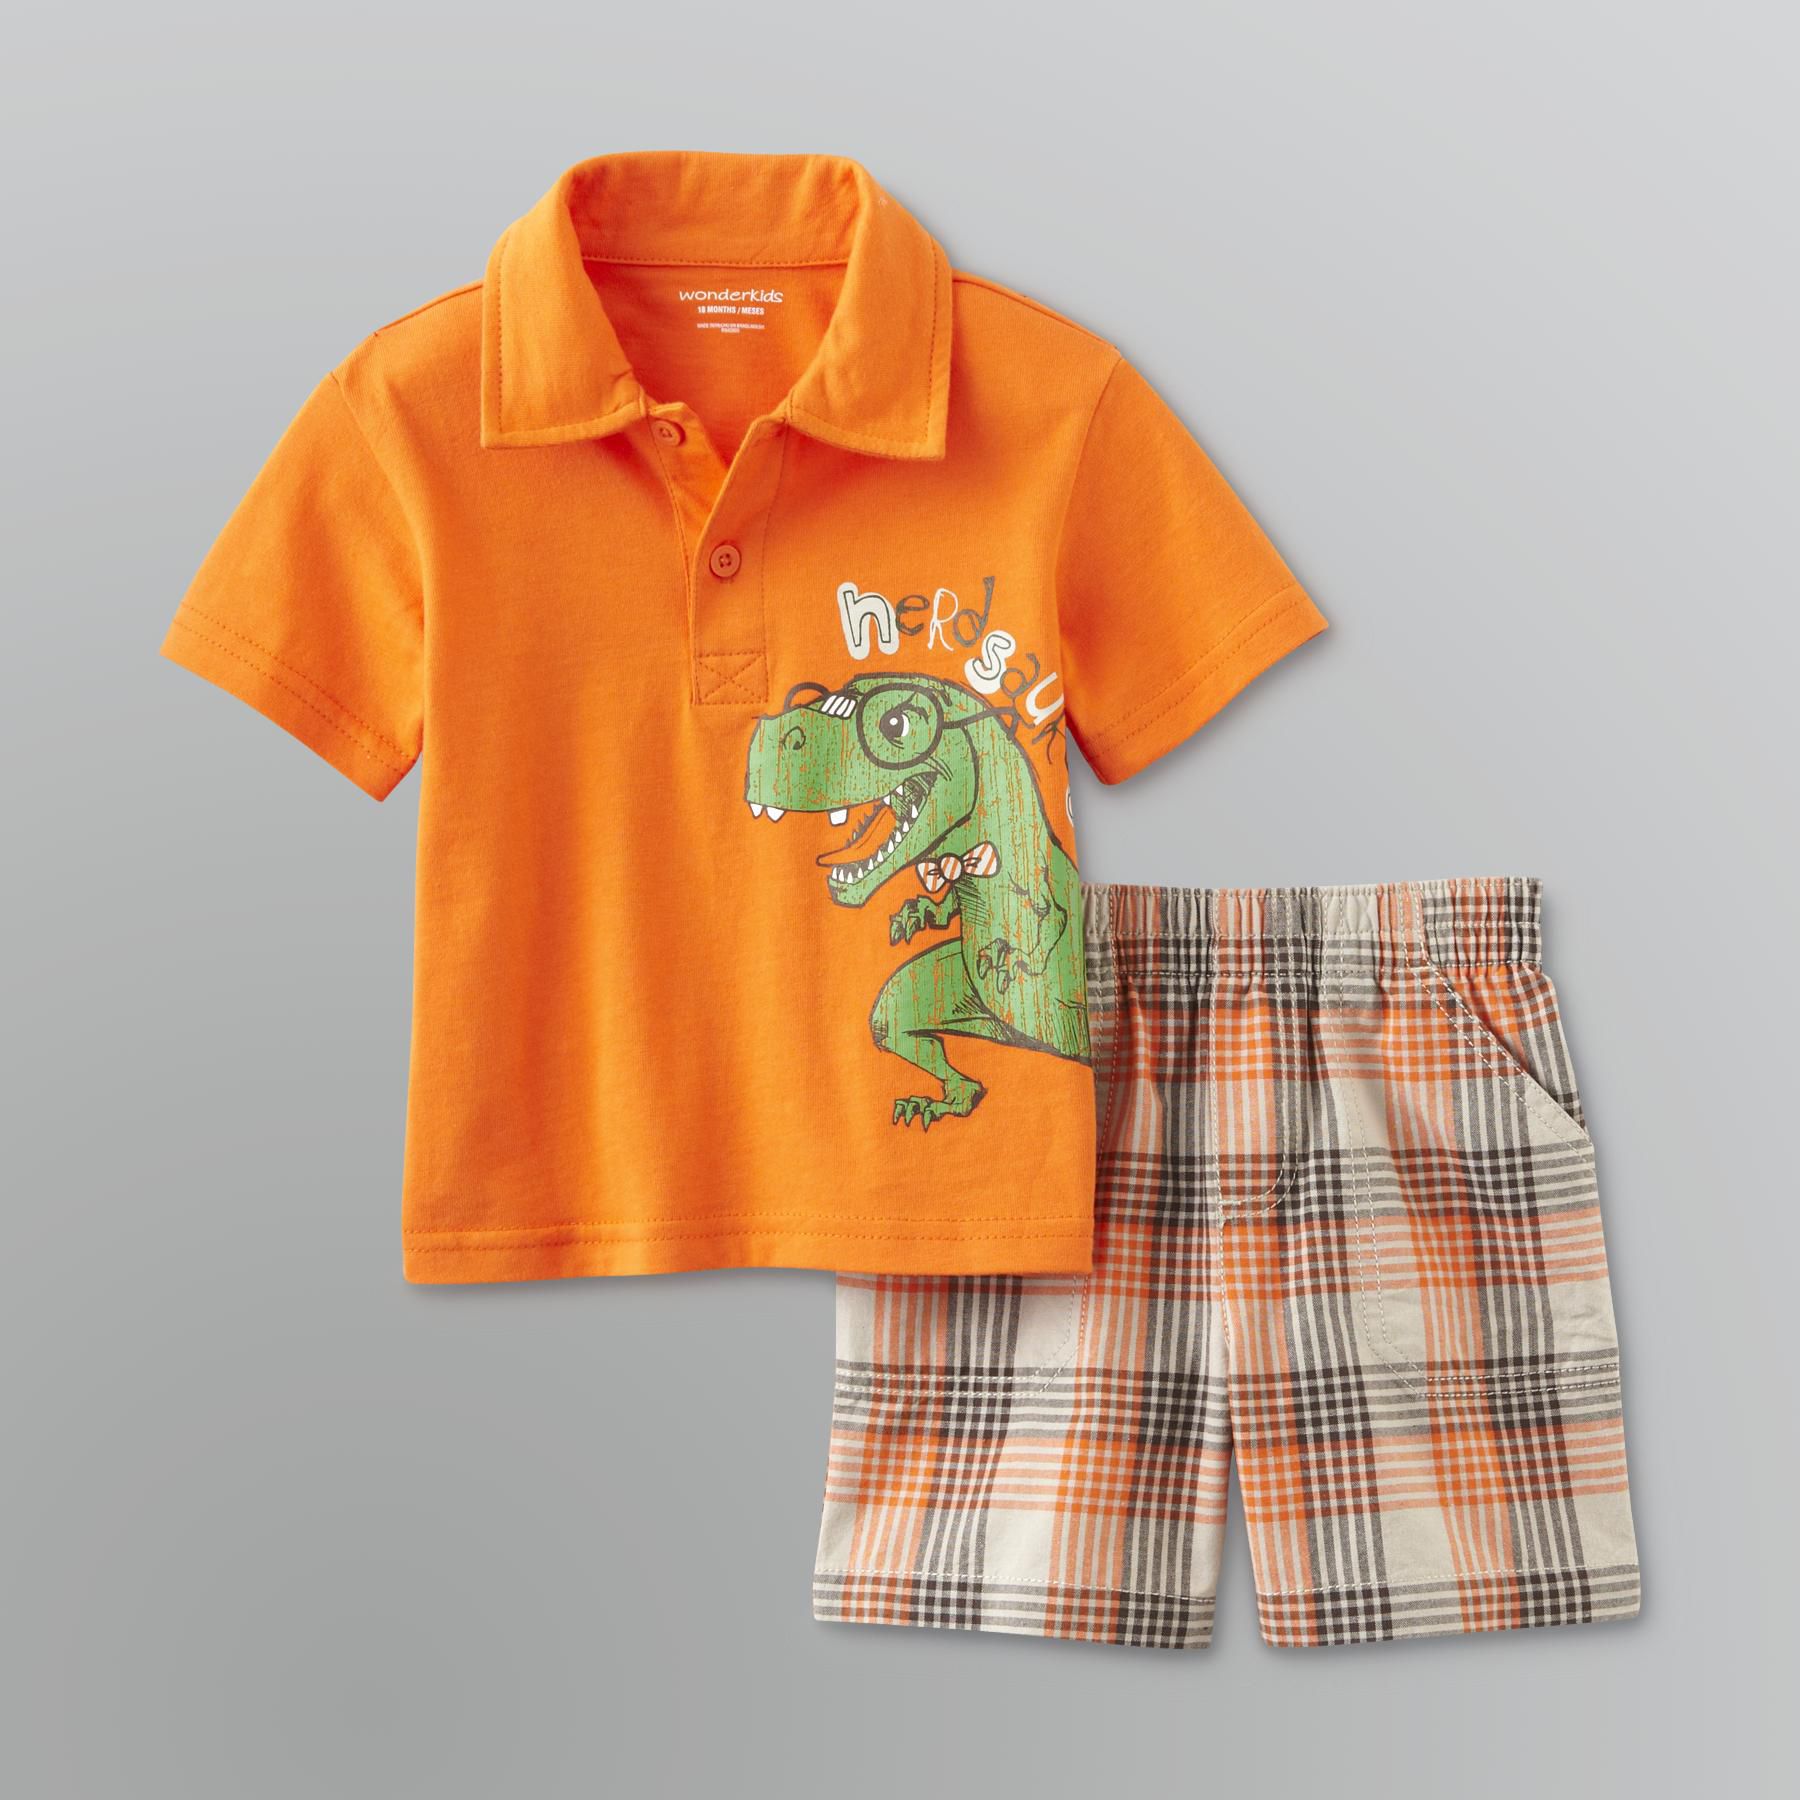 WonderKids Infant and Toddler Boy's Polo Shirt and Shorts Set